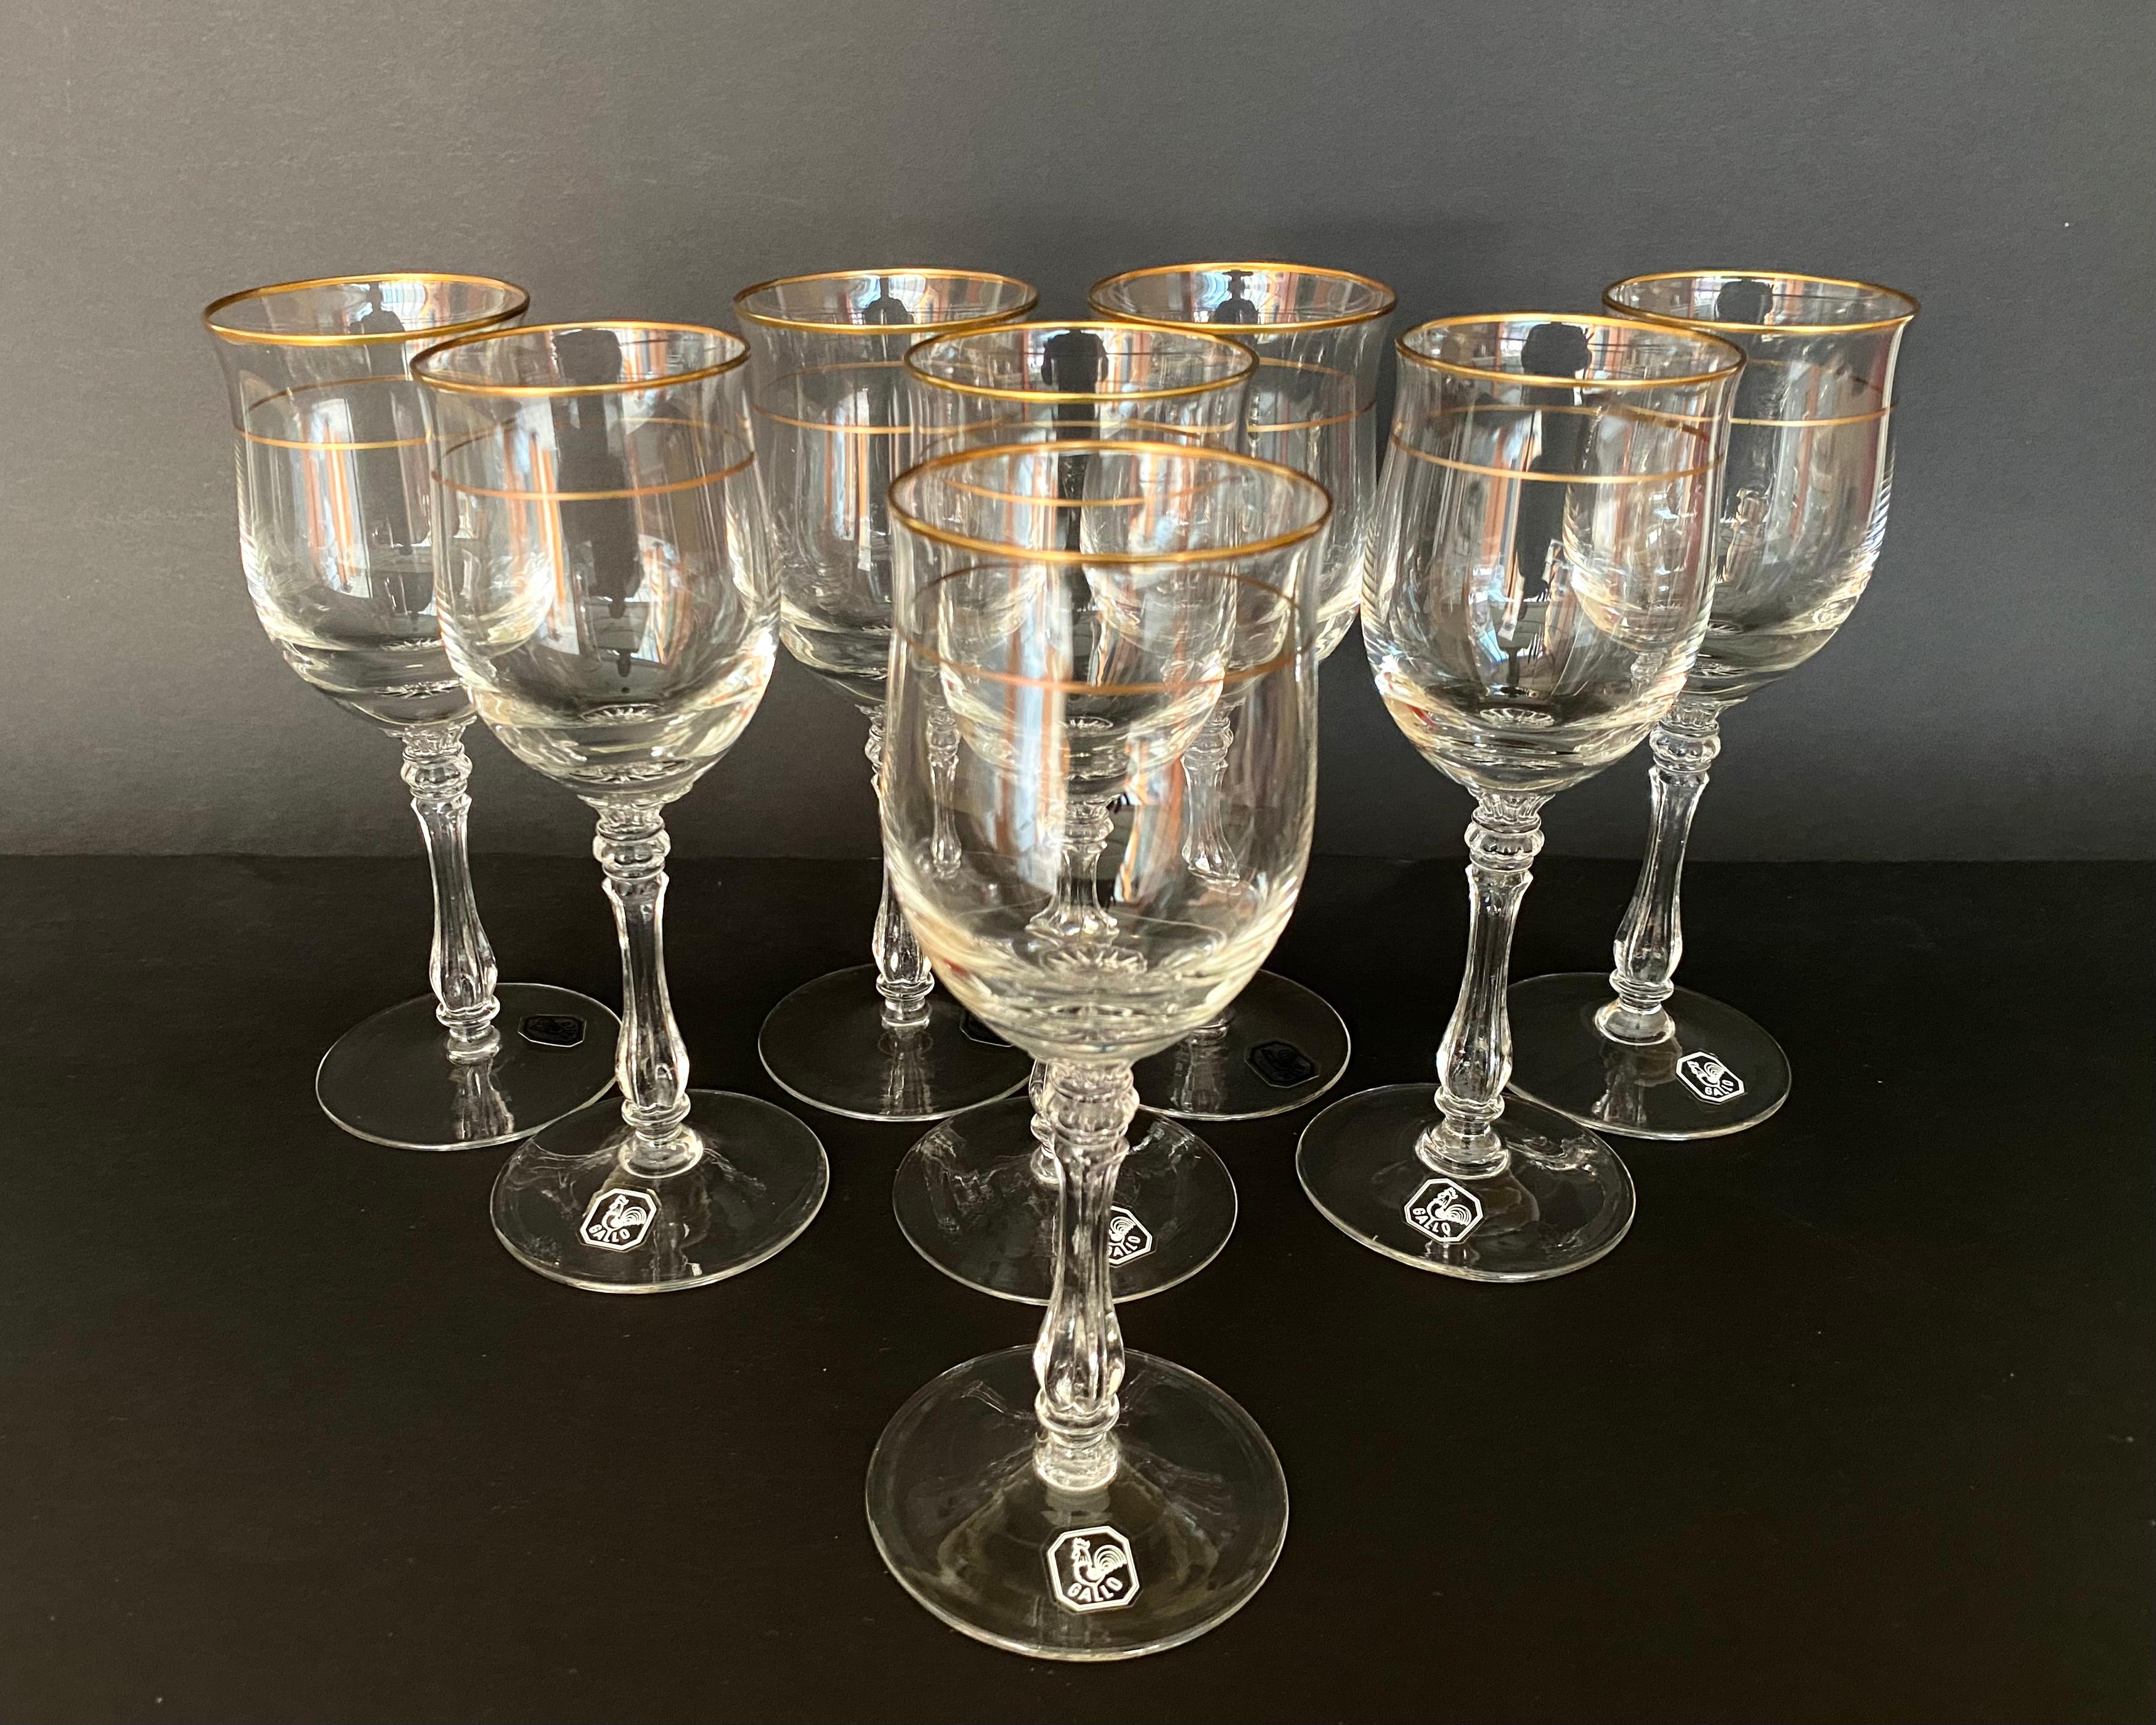 German Crystal Wine Glasses by Gallo Set 8 Crystal Wine Glasses, 1980 For Sale